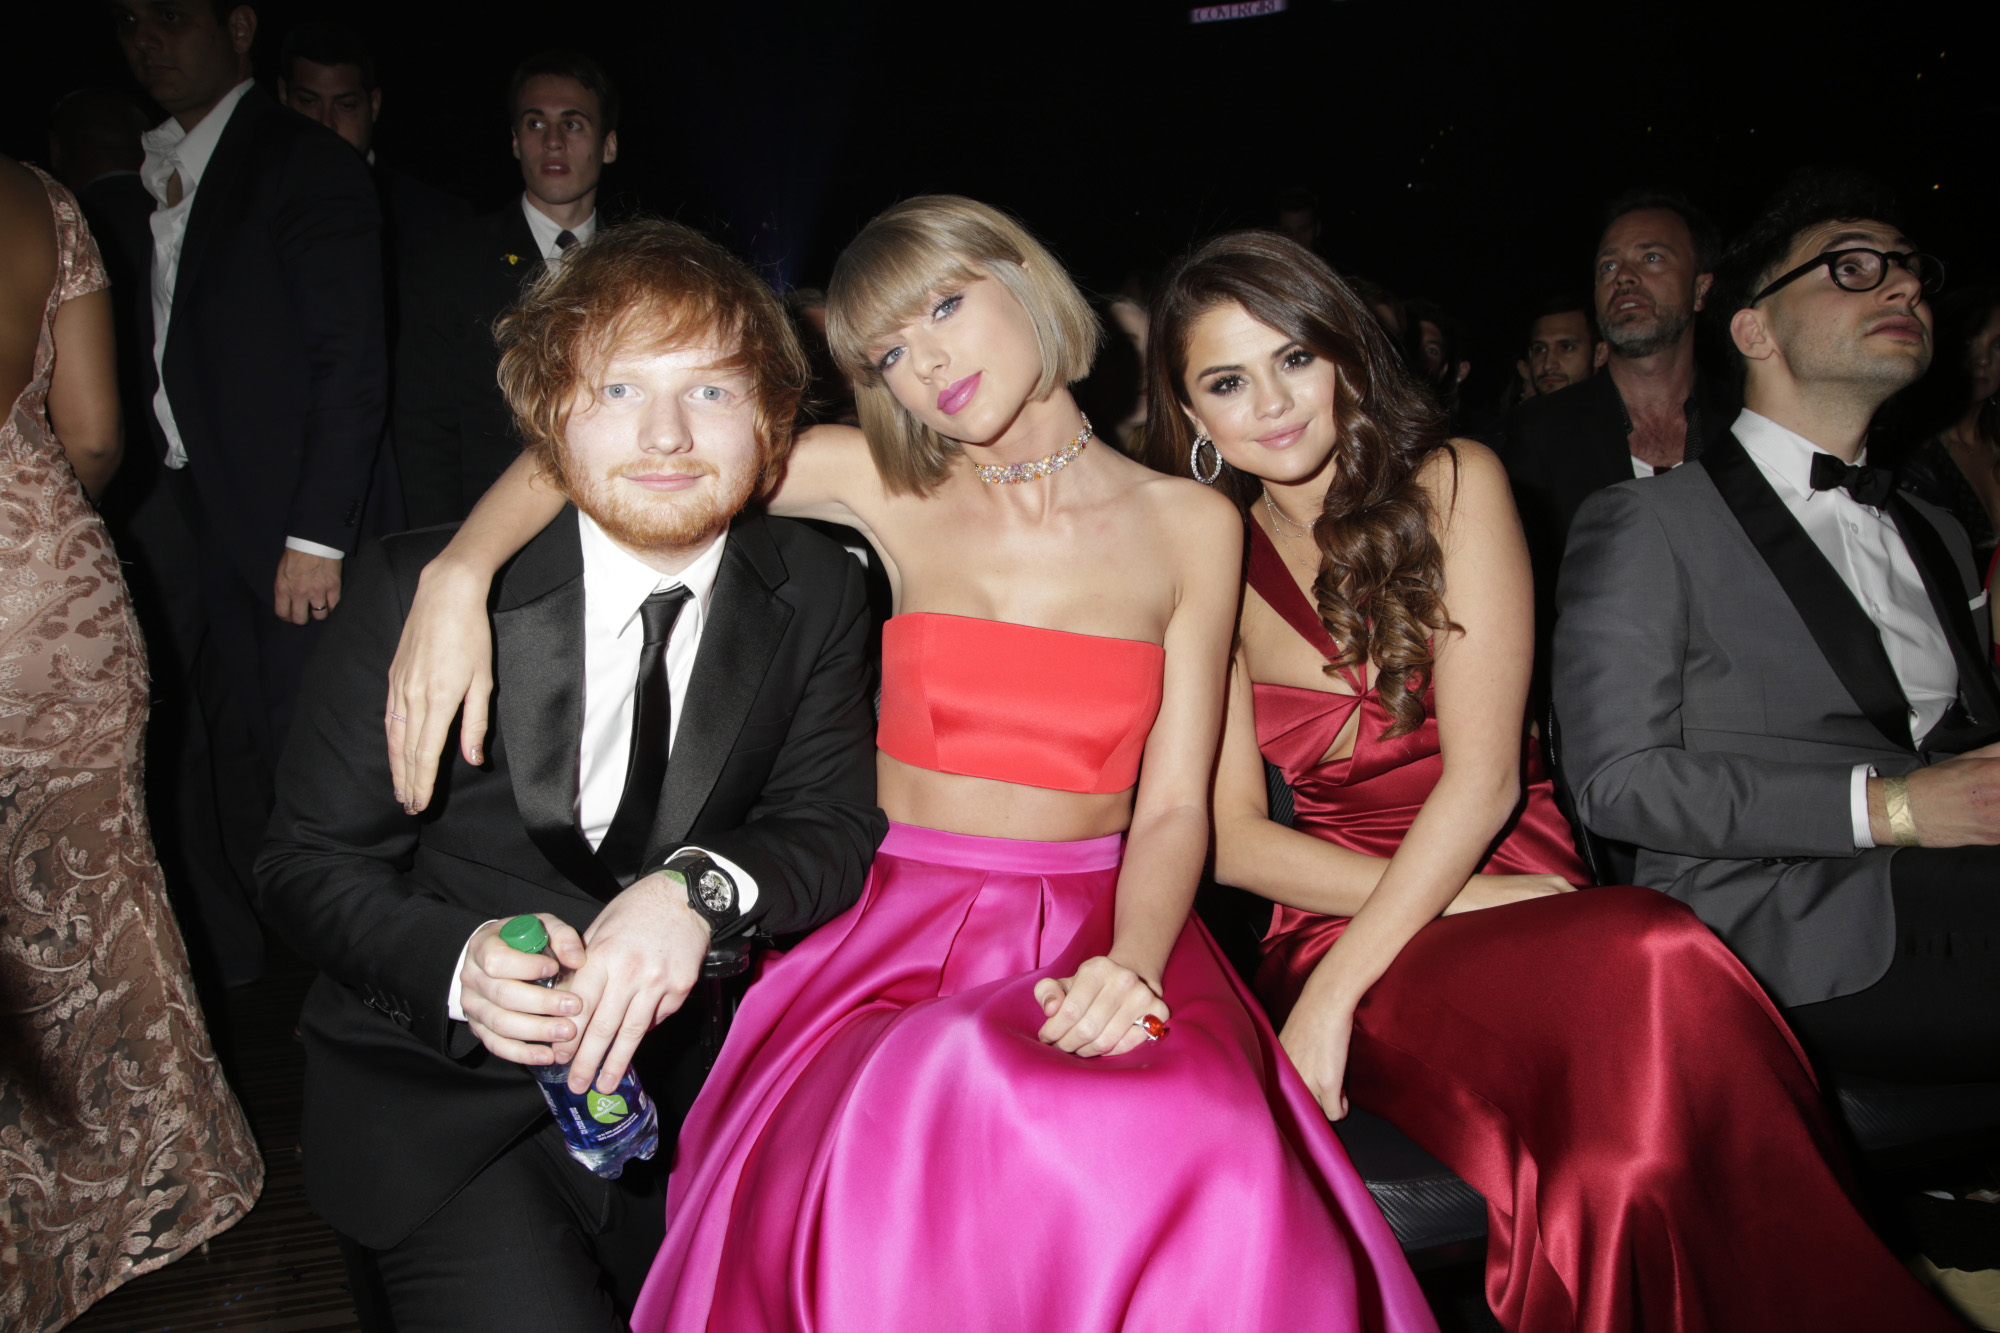 Ed Sheeran, Taylor Swift, and Selena Gomez in the audience at The 58TH ANNUAL GRAMMY AWARDS on Monday, Feb. 15, 2016 (8:00-11:30 PM, live ET) at STAPLES Center in Los Angeles and broadcast on the CBS Television Network. (Photo by Francis Specker/CBS via Getty Images) (CBS Photo Archive—CBS via Getty Images)